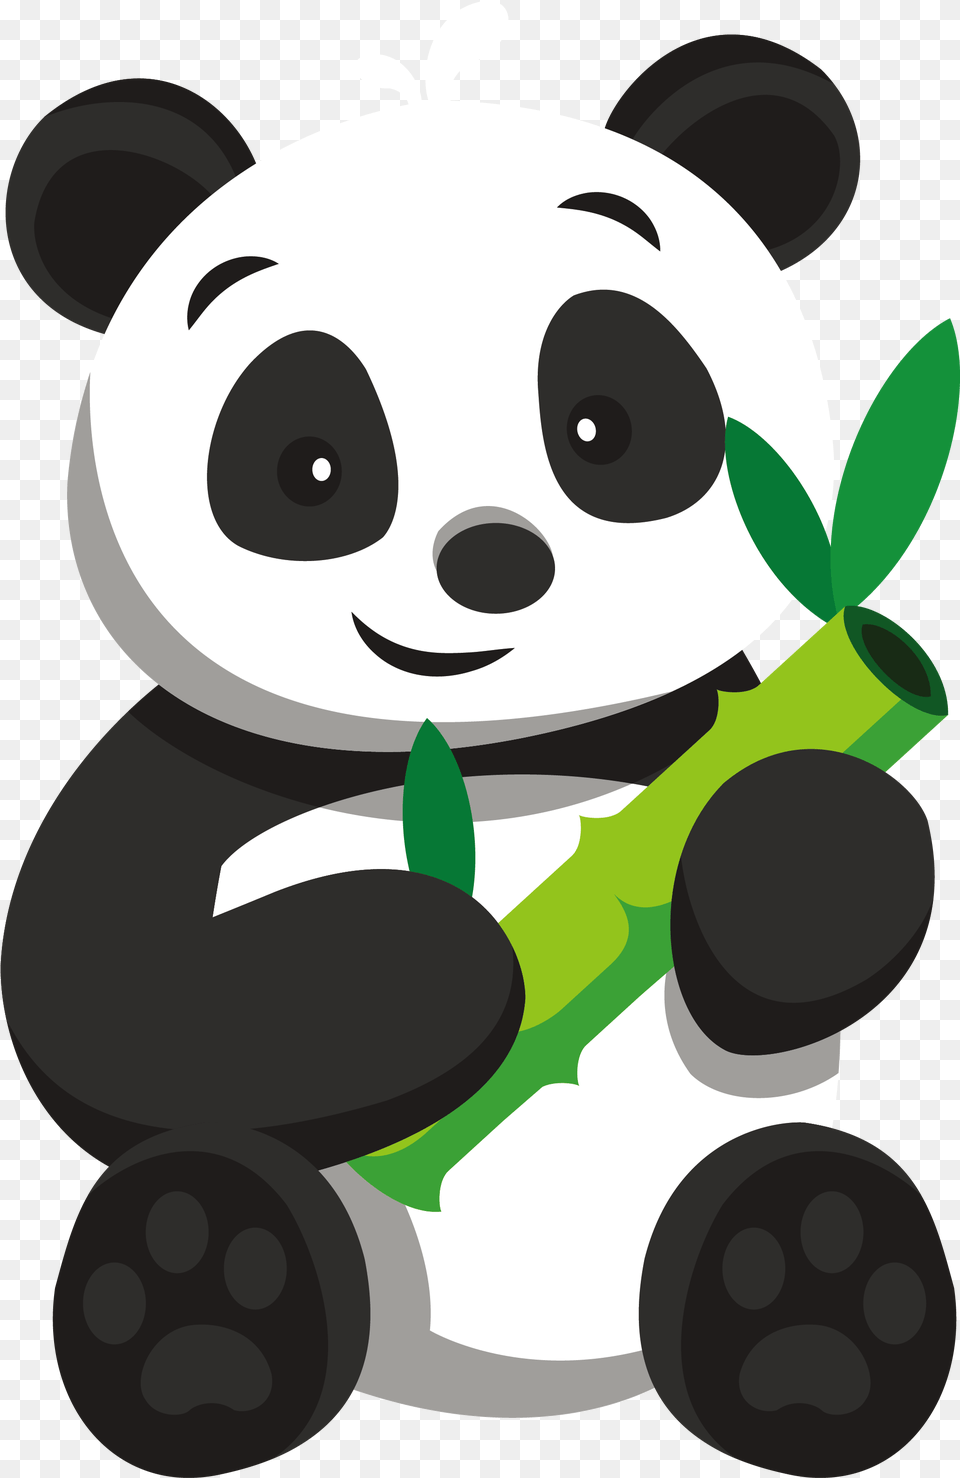 Library Of Bamboo Tree Image Files Clipart Images Of Panda, Berry, Blueberry, Produce, Food Free Png